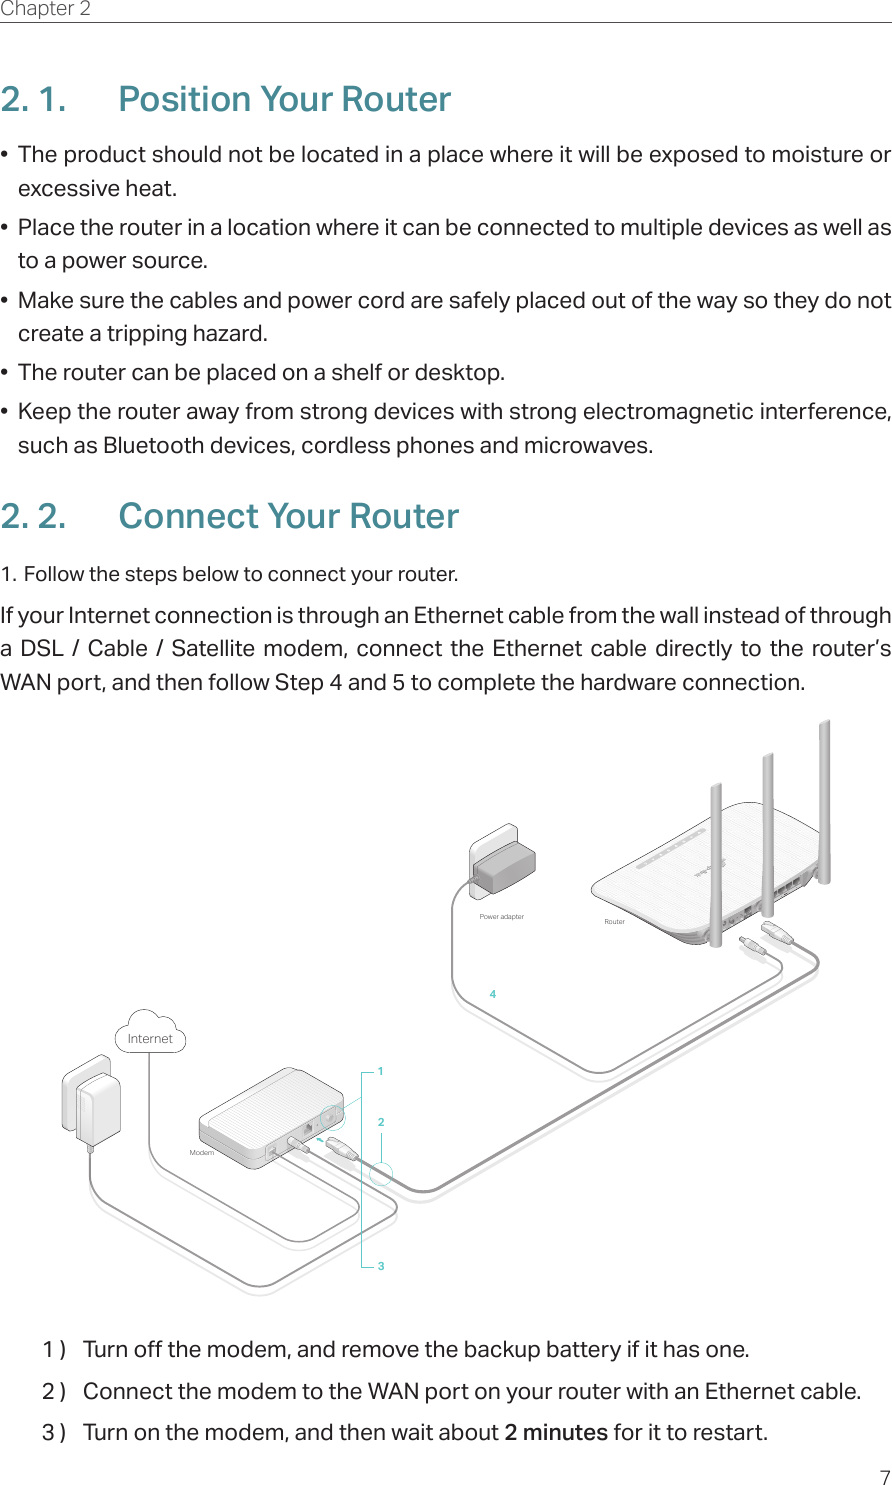 7Chapter 2  2. 1.  Position Your Router•  The product should not be located in a place where it will be exposed to moisture or excessive heat.•  Place the router in a location where it can be connected to multiple devices as well as to a power source.•  Make sure the cables and power cord are safely placed out of the way so they do not create a tripping hazard.•  The router can be placed on a shelf or desktop.•  Keep the router away from strong devices with strong electromagnetic interference, such as Bluetooth devices, cordless phones and microwaves.2. 2.  Connect Your Router1. Follow the steps below to connect your router.If your Internet connection is through an Ethernet cable from the wall instead of through a DSL / Cable / Satellite modem, connect the Ethernet cable directly to the router’s WAN port, and then follow Step 4 and 5 to complete the hardware connection.421Power adapter Router3ModemInternet1 )  Turn off the modem, and remove the backup battery if it has one.2 )  Connect the modem to the WAN port on your router with an Ethernet cable.3 )  Turn on the modem, and then wait about 2 minutes for it to restart.